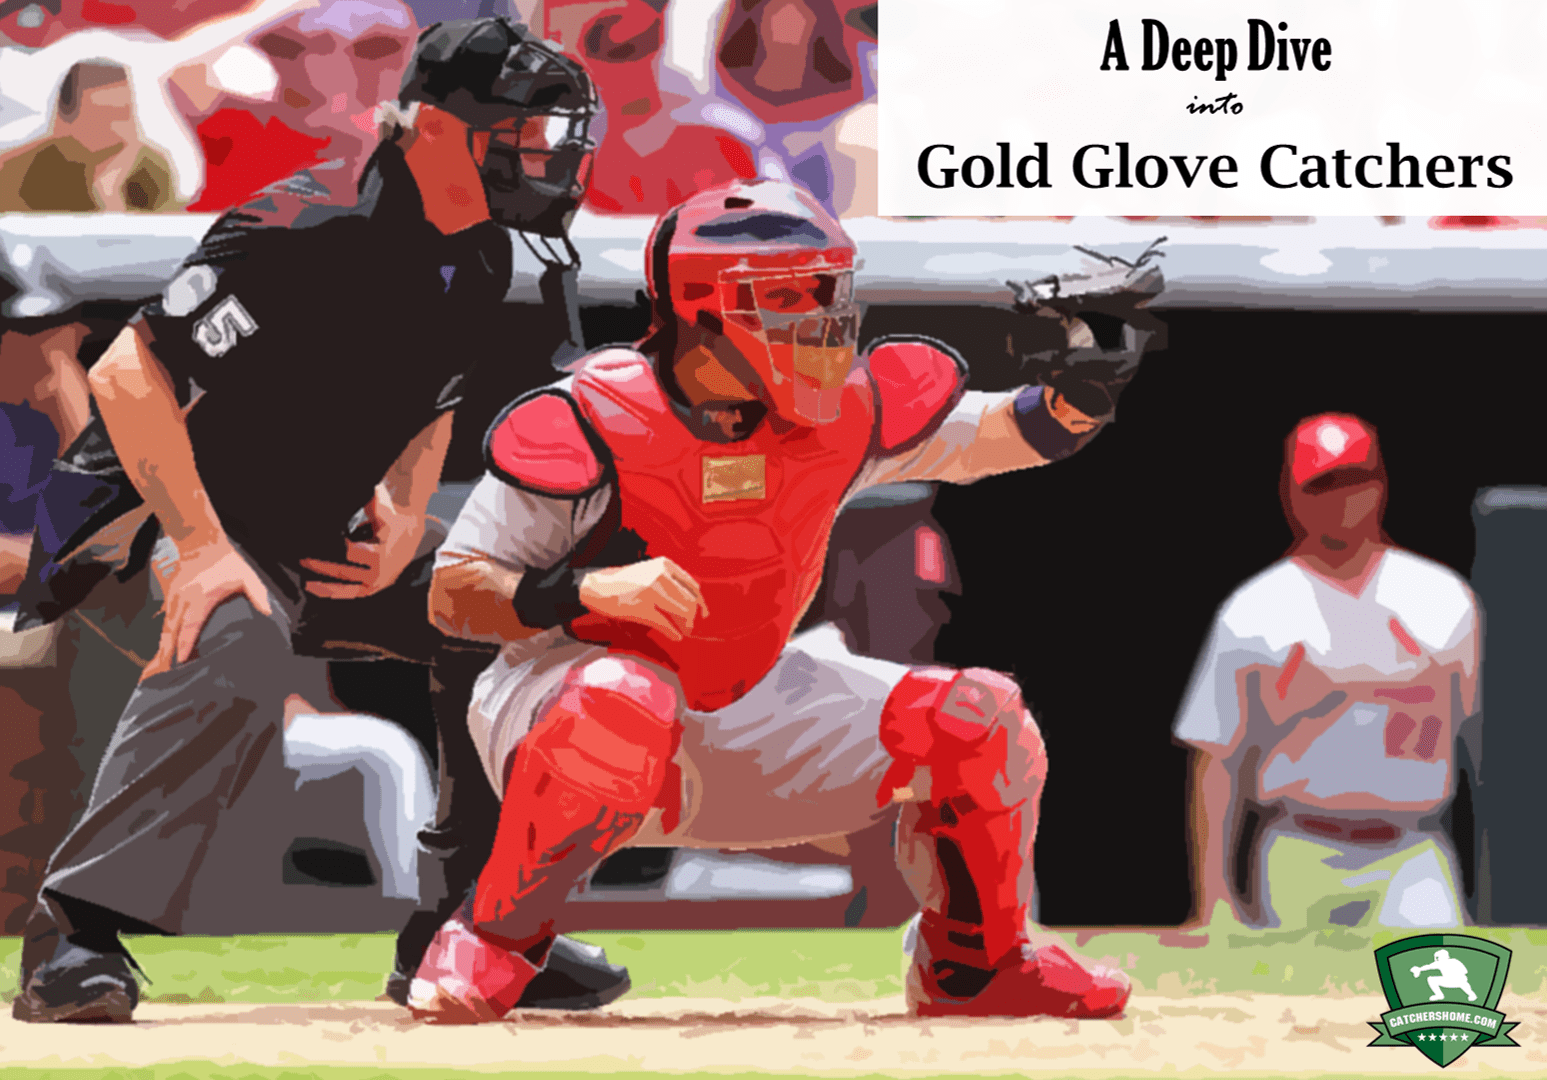 gold glove catchers with gold gloves